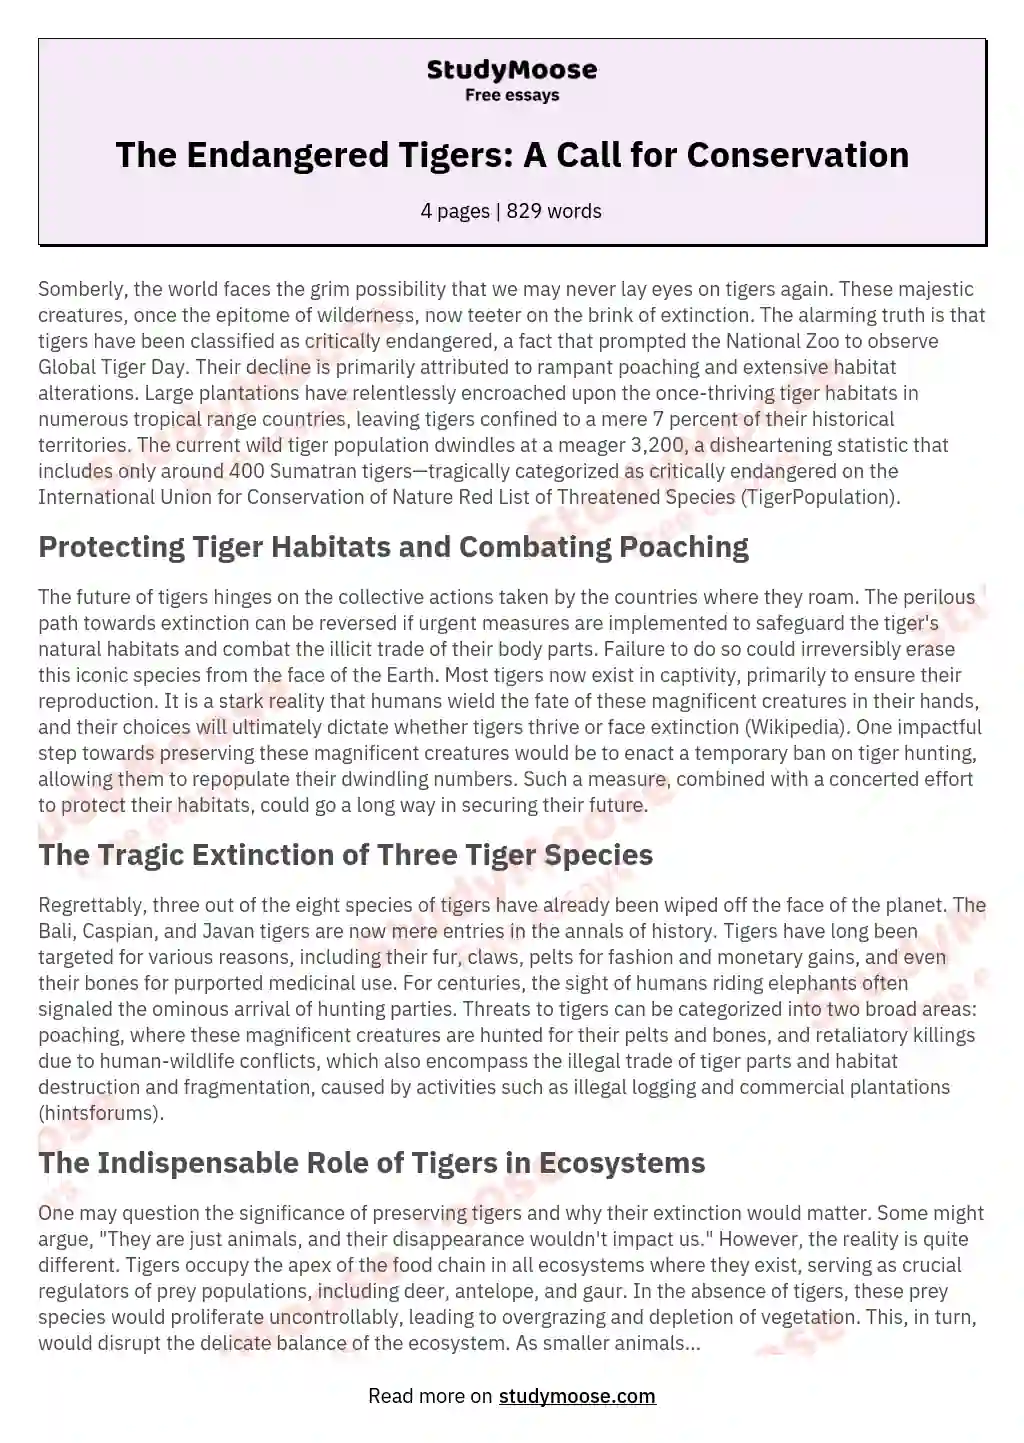 The Endangered Tigers: A Call for Conservation essay